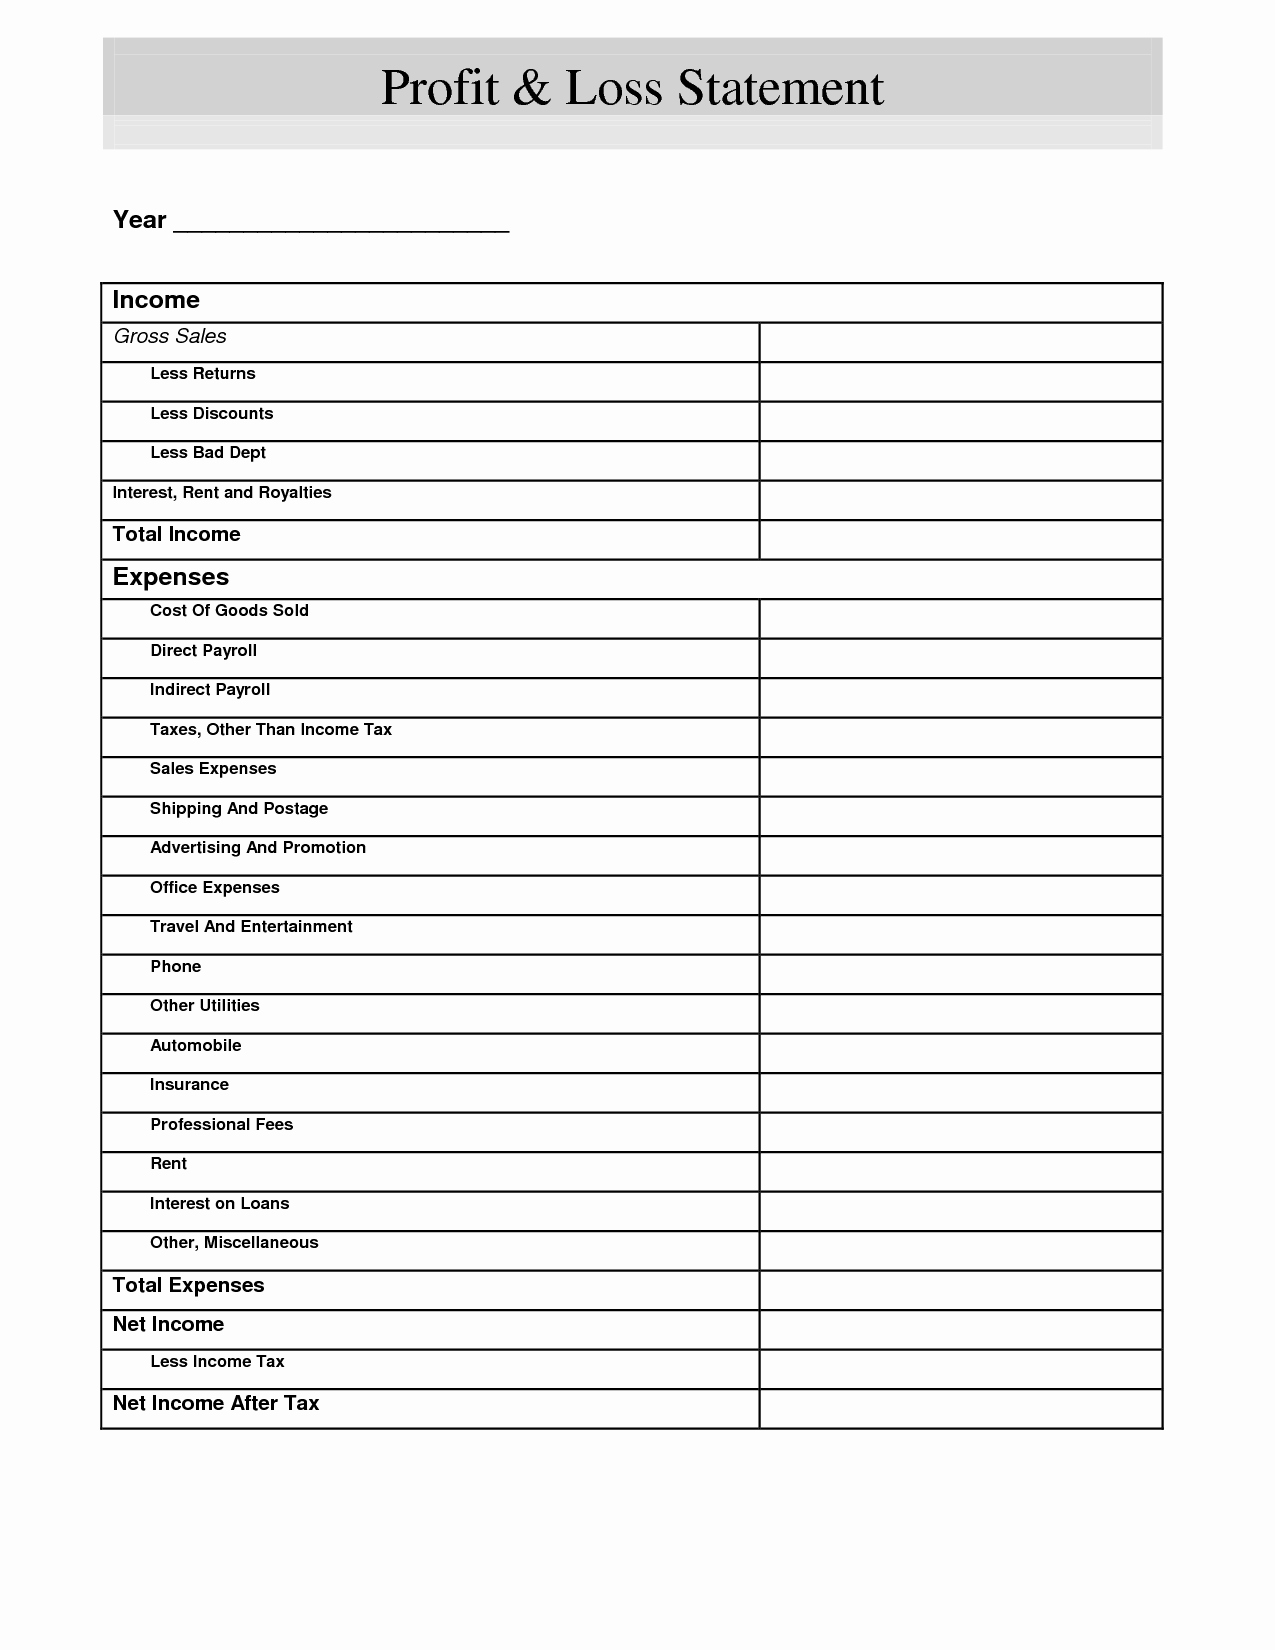 Profit and Loss Statements Template Awesome Profit and Loss Statement Template